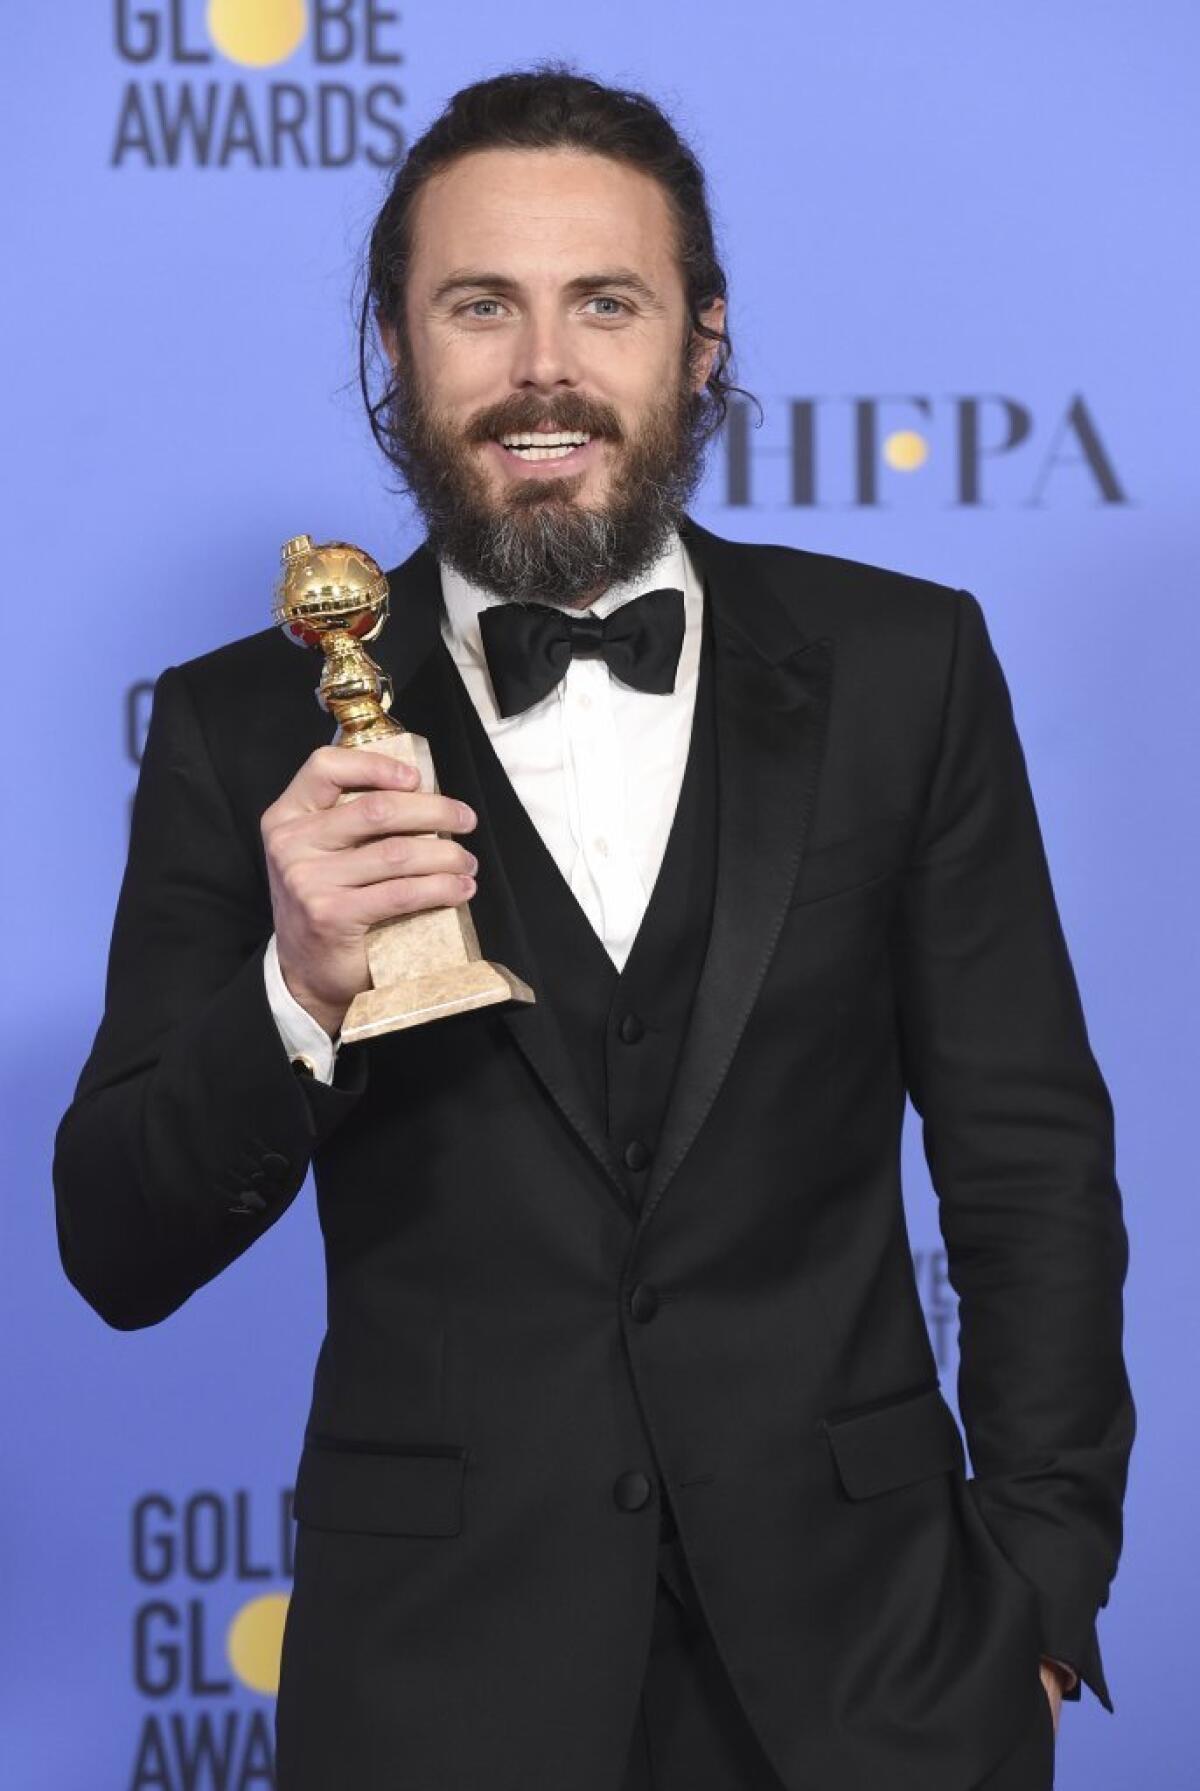 Casey Affleck poses in the press room with the award for best performance by an actor in a motion picture - drama for "Manchester by the Sea" room at the 74th annual Golden Globe Awards at the Beverly Hilton Hotel on Sunday, Jan. 8, 2017, in Beverly Hills, Calif.